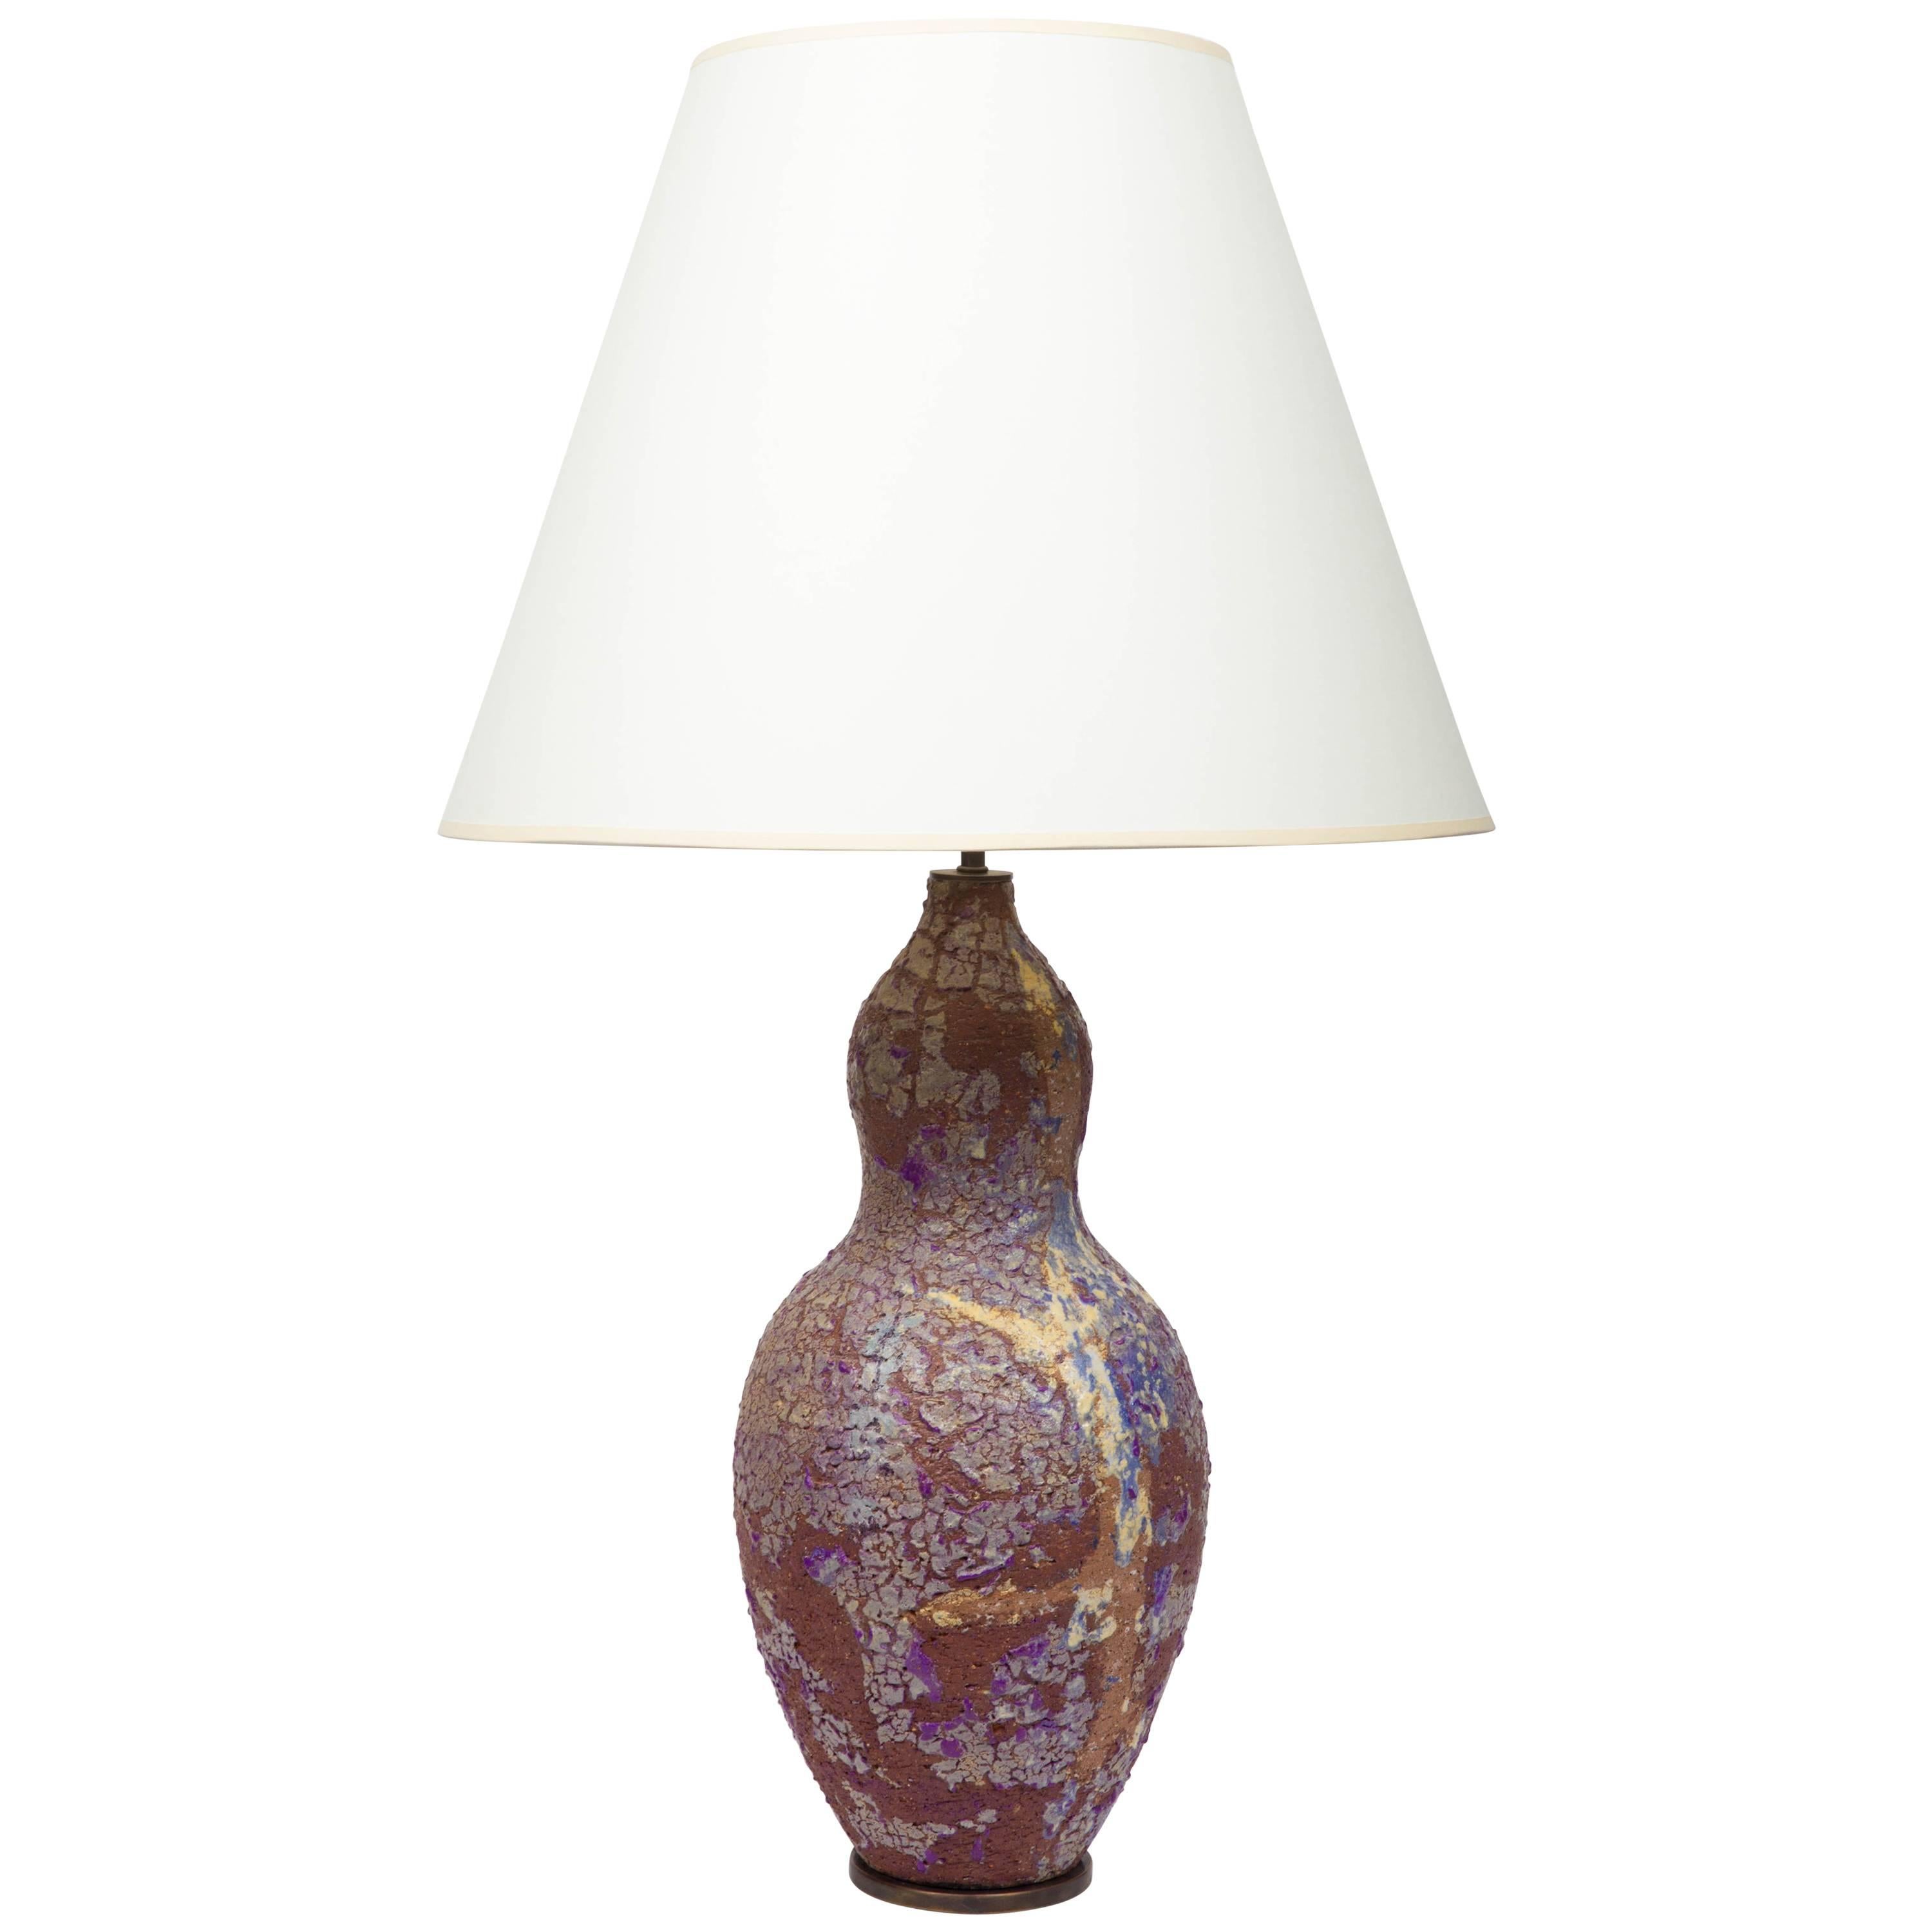 Stoneware Table Lamp with Crackle Glazed, by Marcello Fantoni